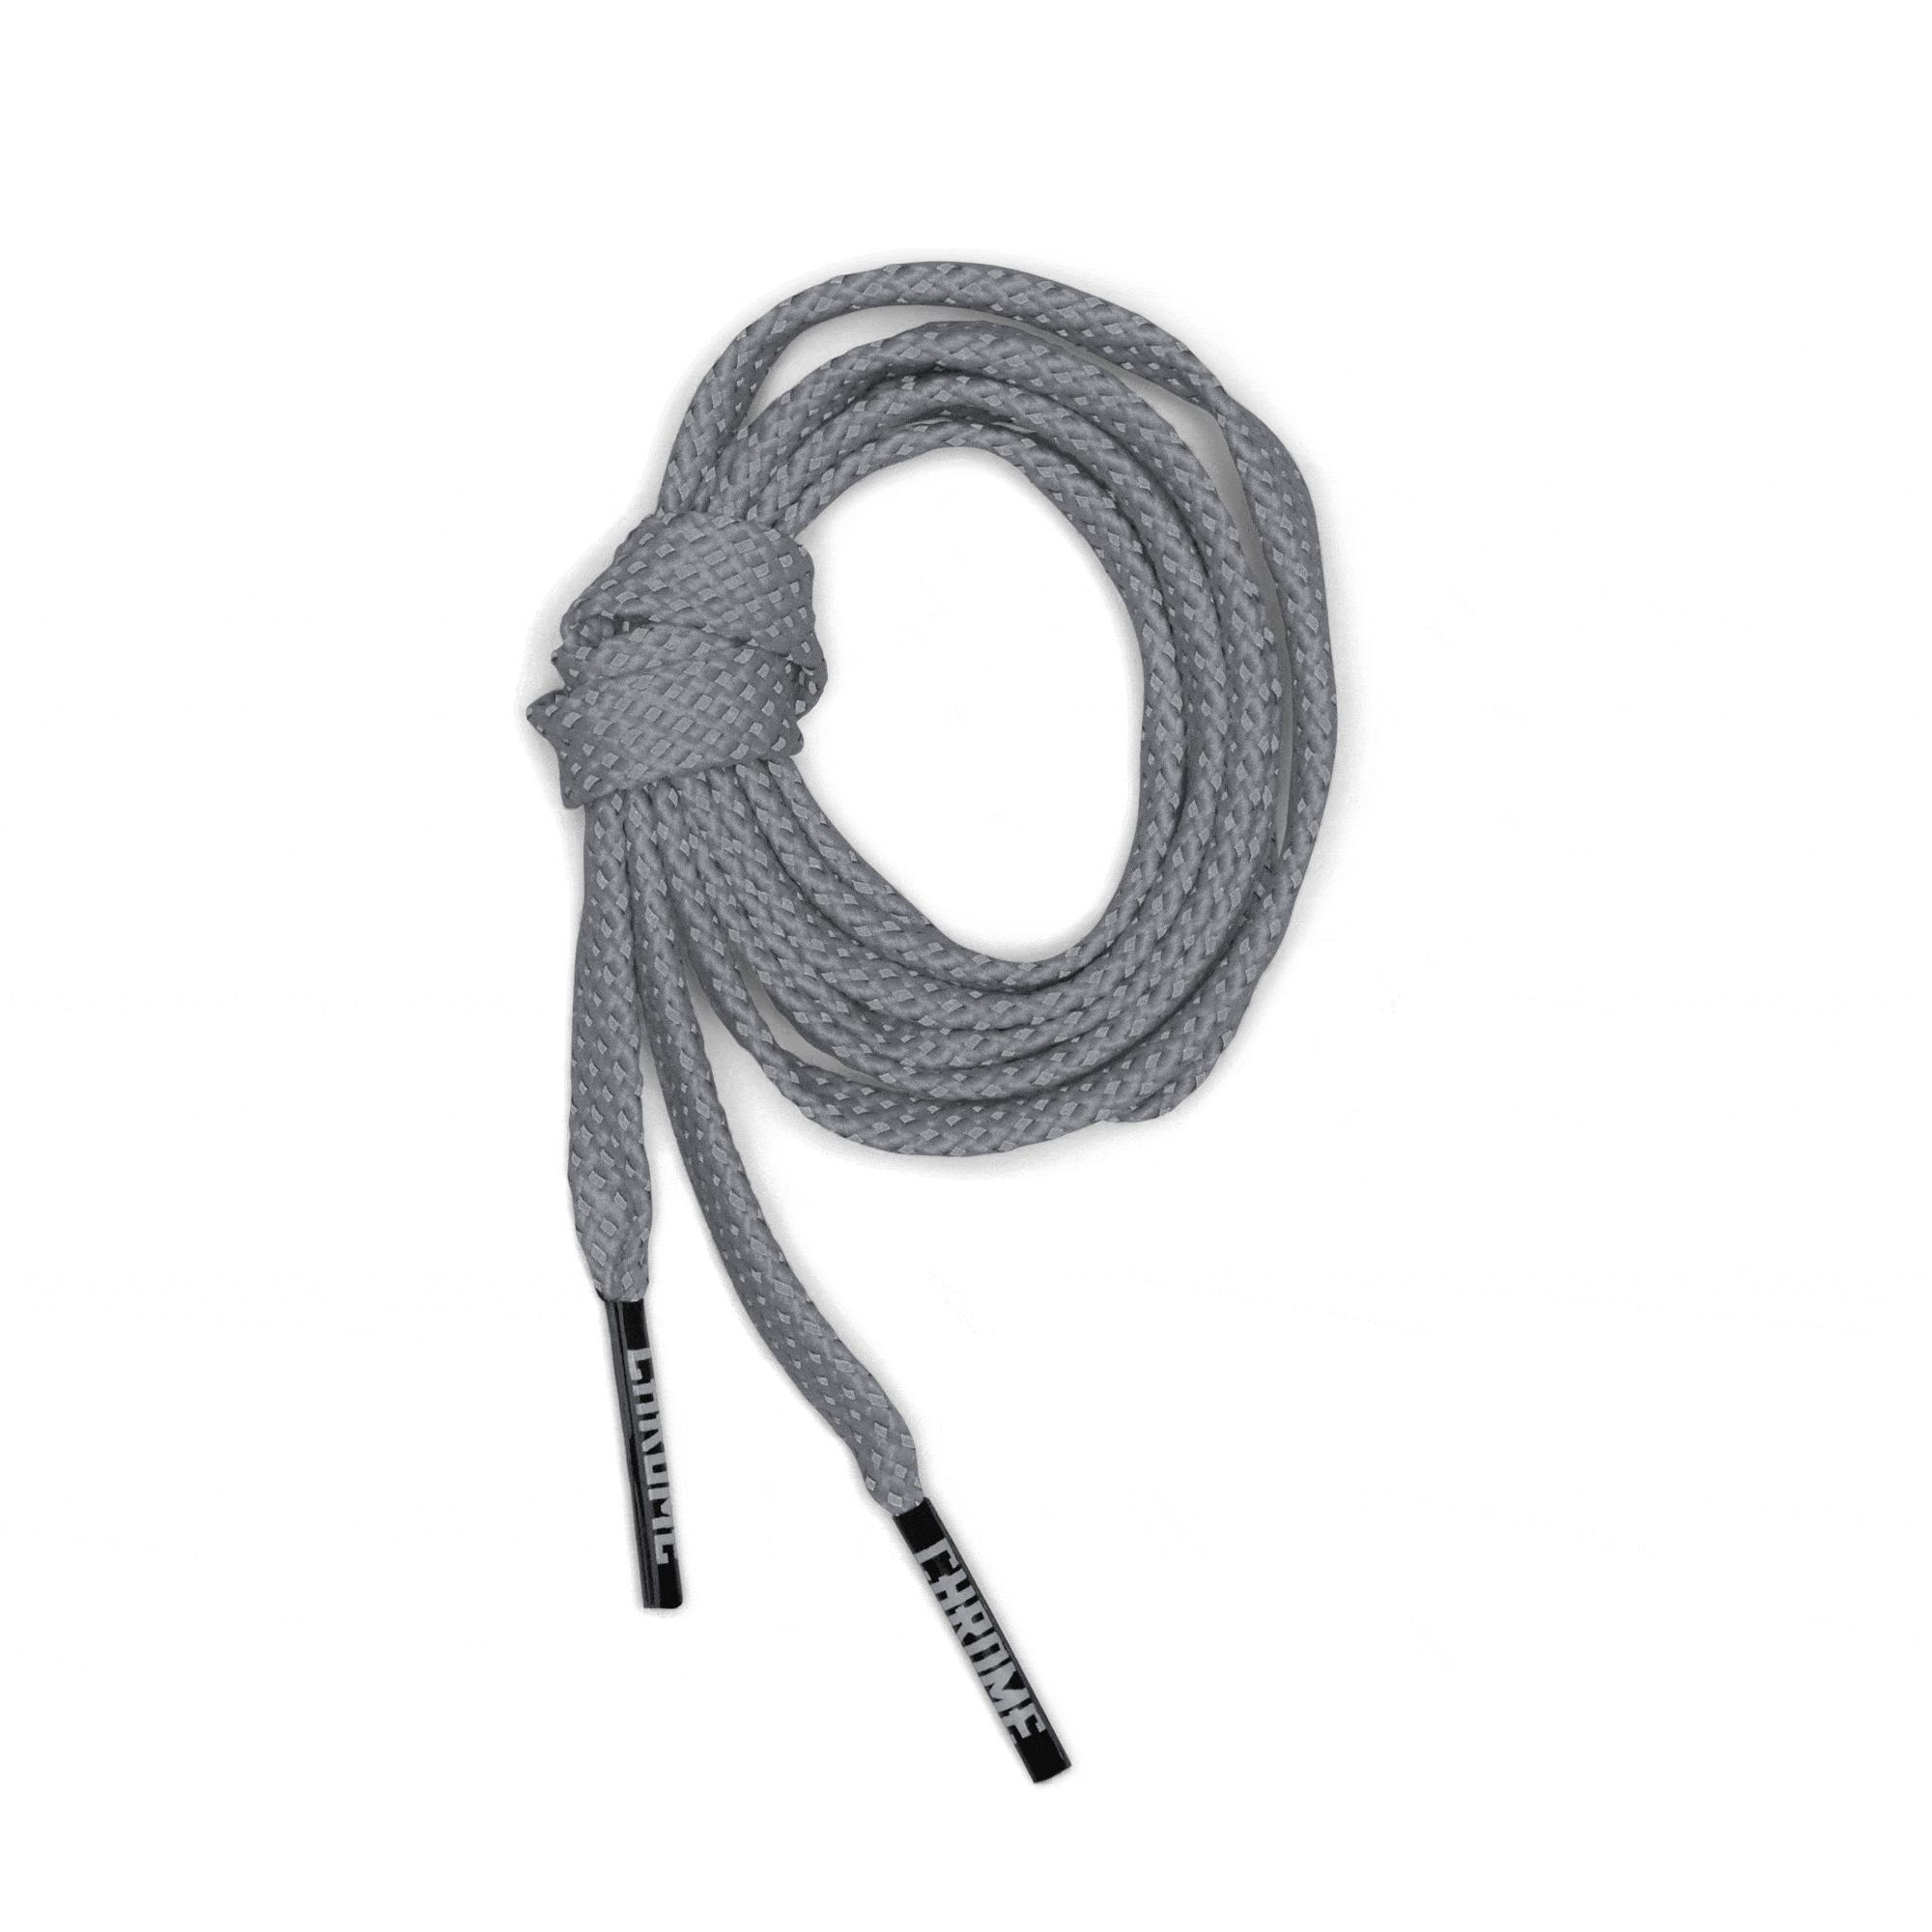 Reflective Flat Shoe Laces in grey showing reflectivity #color_grey reflective